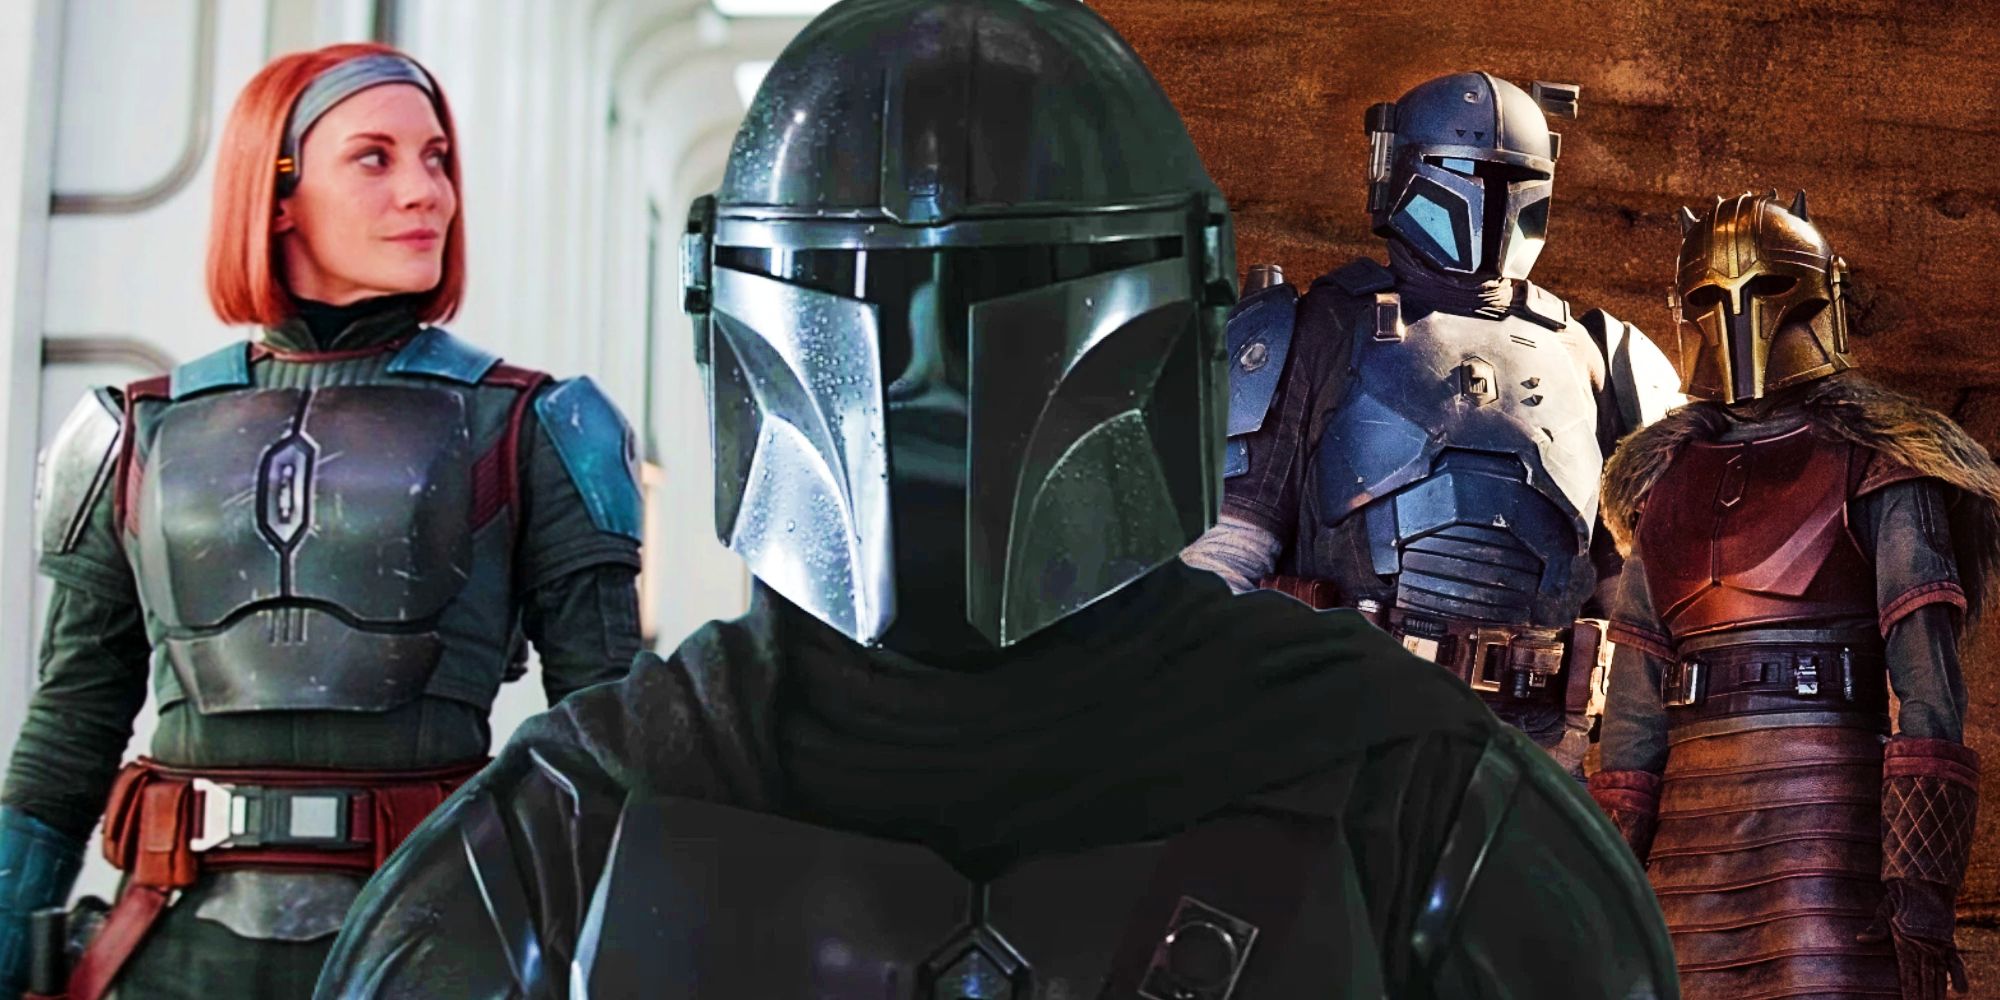 The Mandalorian' season three review: Early episodes burdened by backstory  : NPR